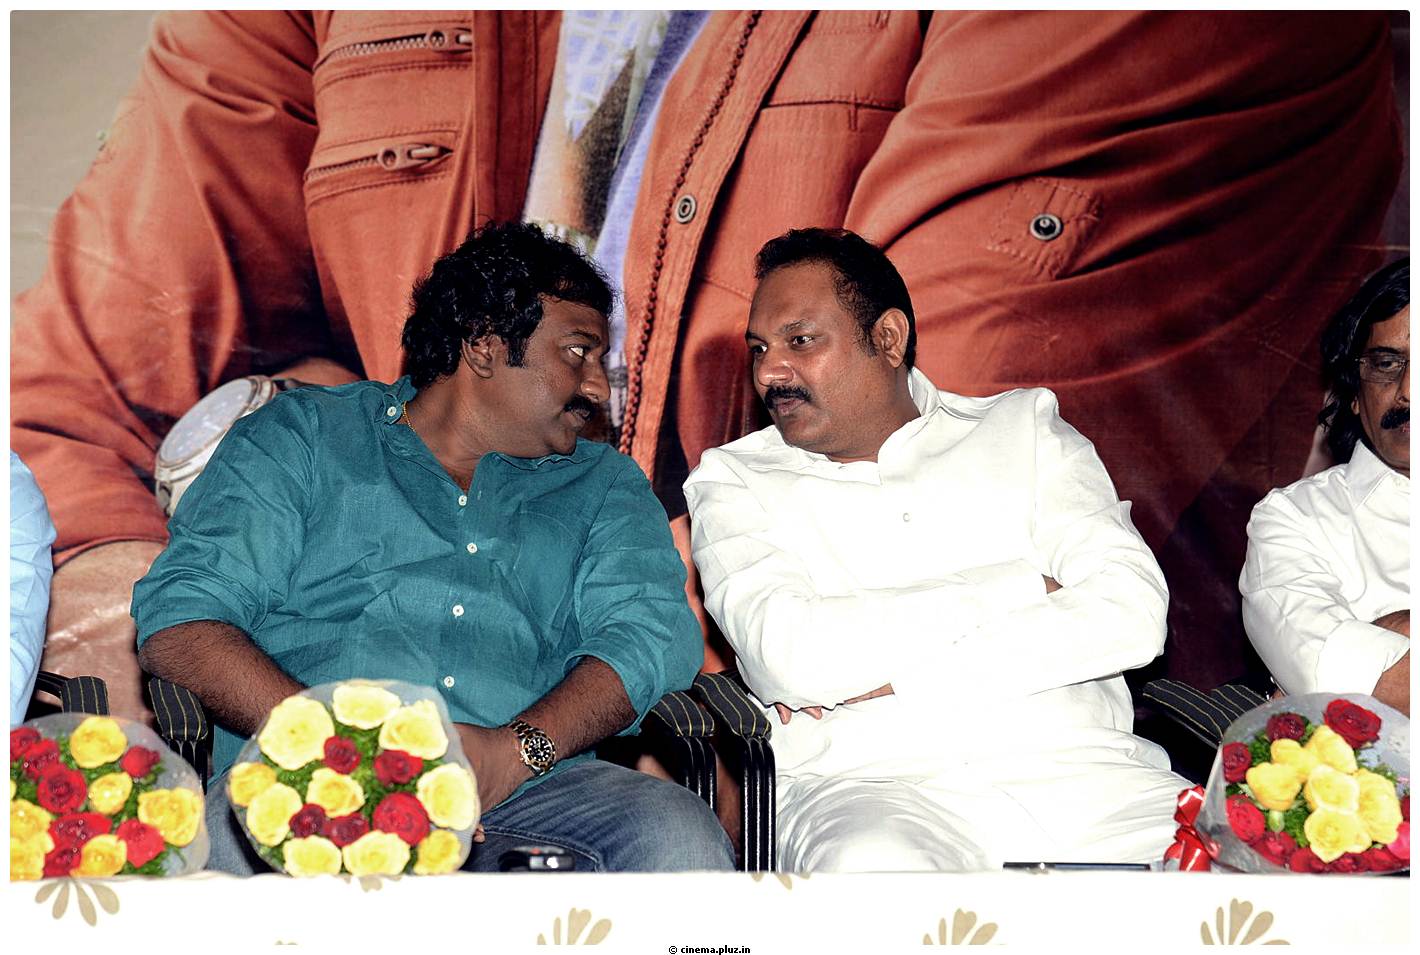 Anna Movie Audio Release Function Photos | Picture 530094